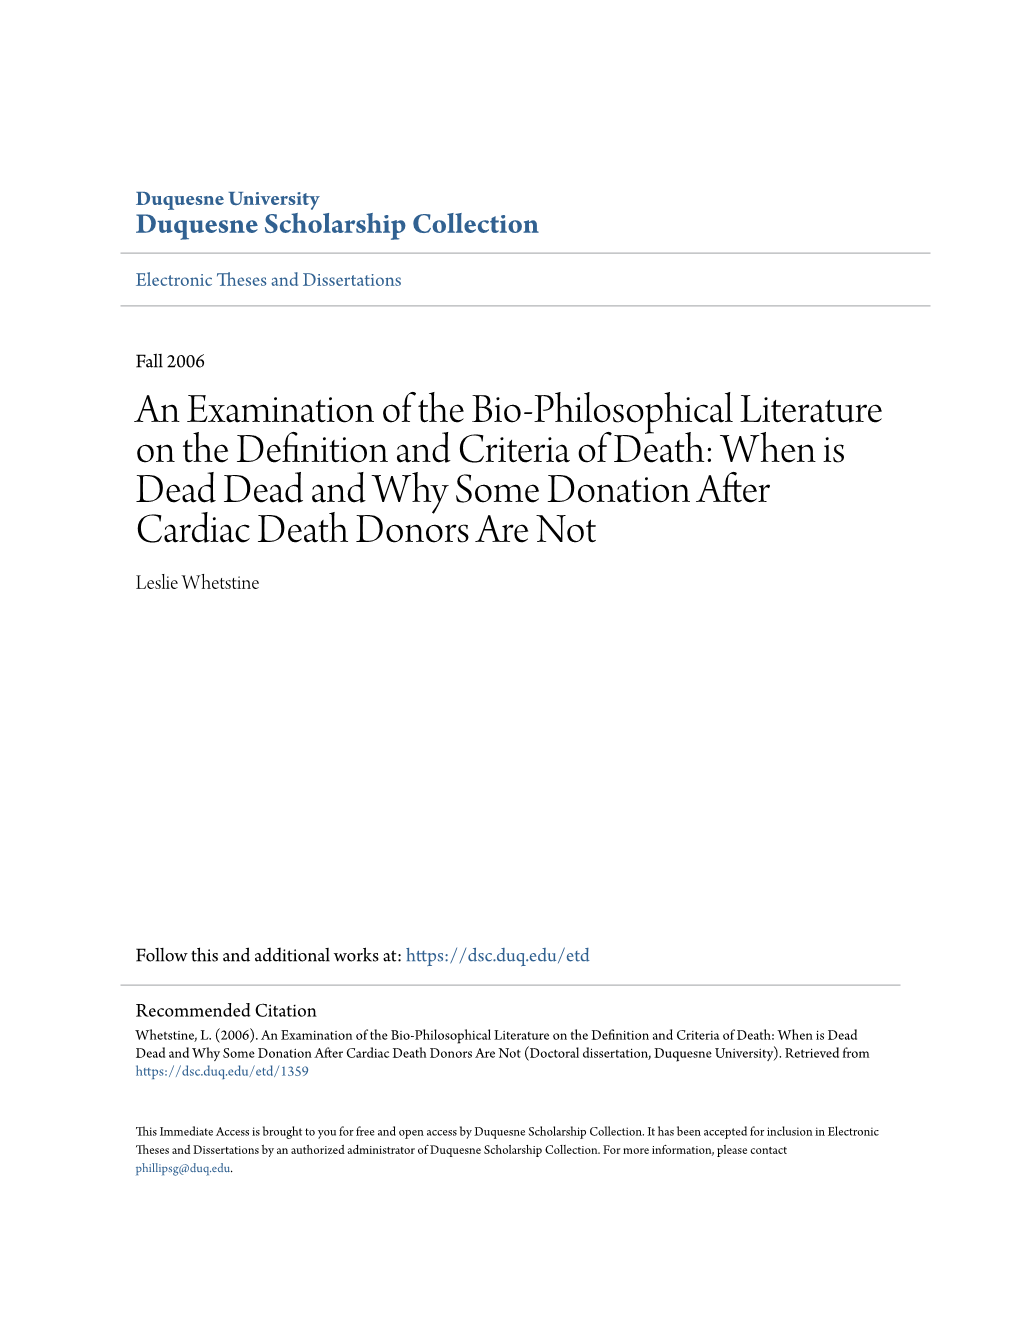 An Examination of the Bio-Philosophical Literature on the Definition and Criteria of Death